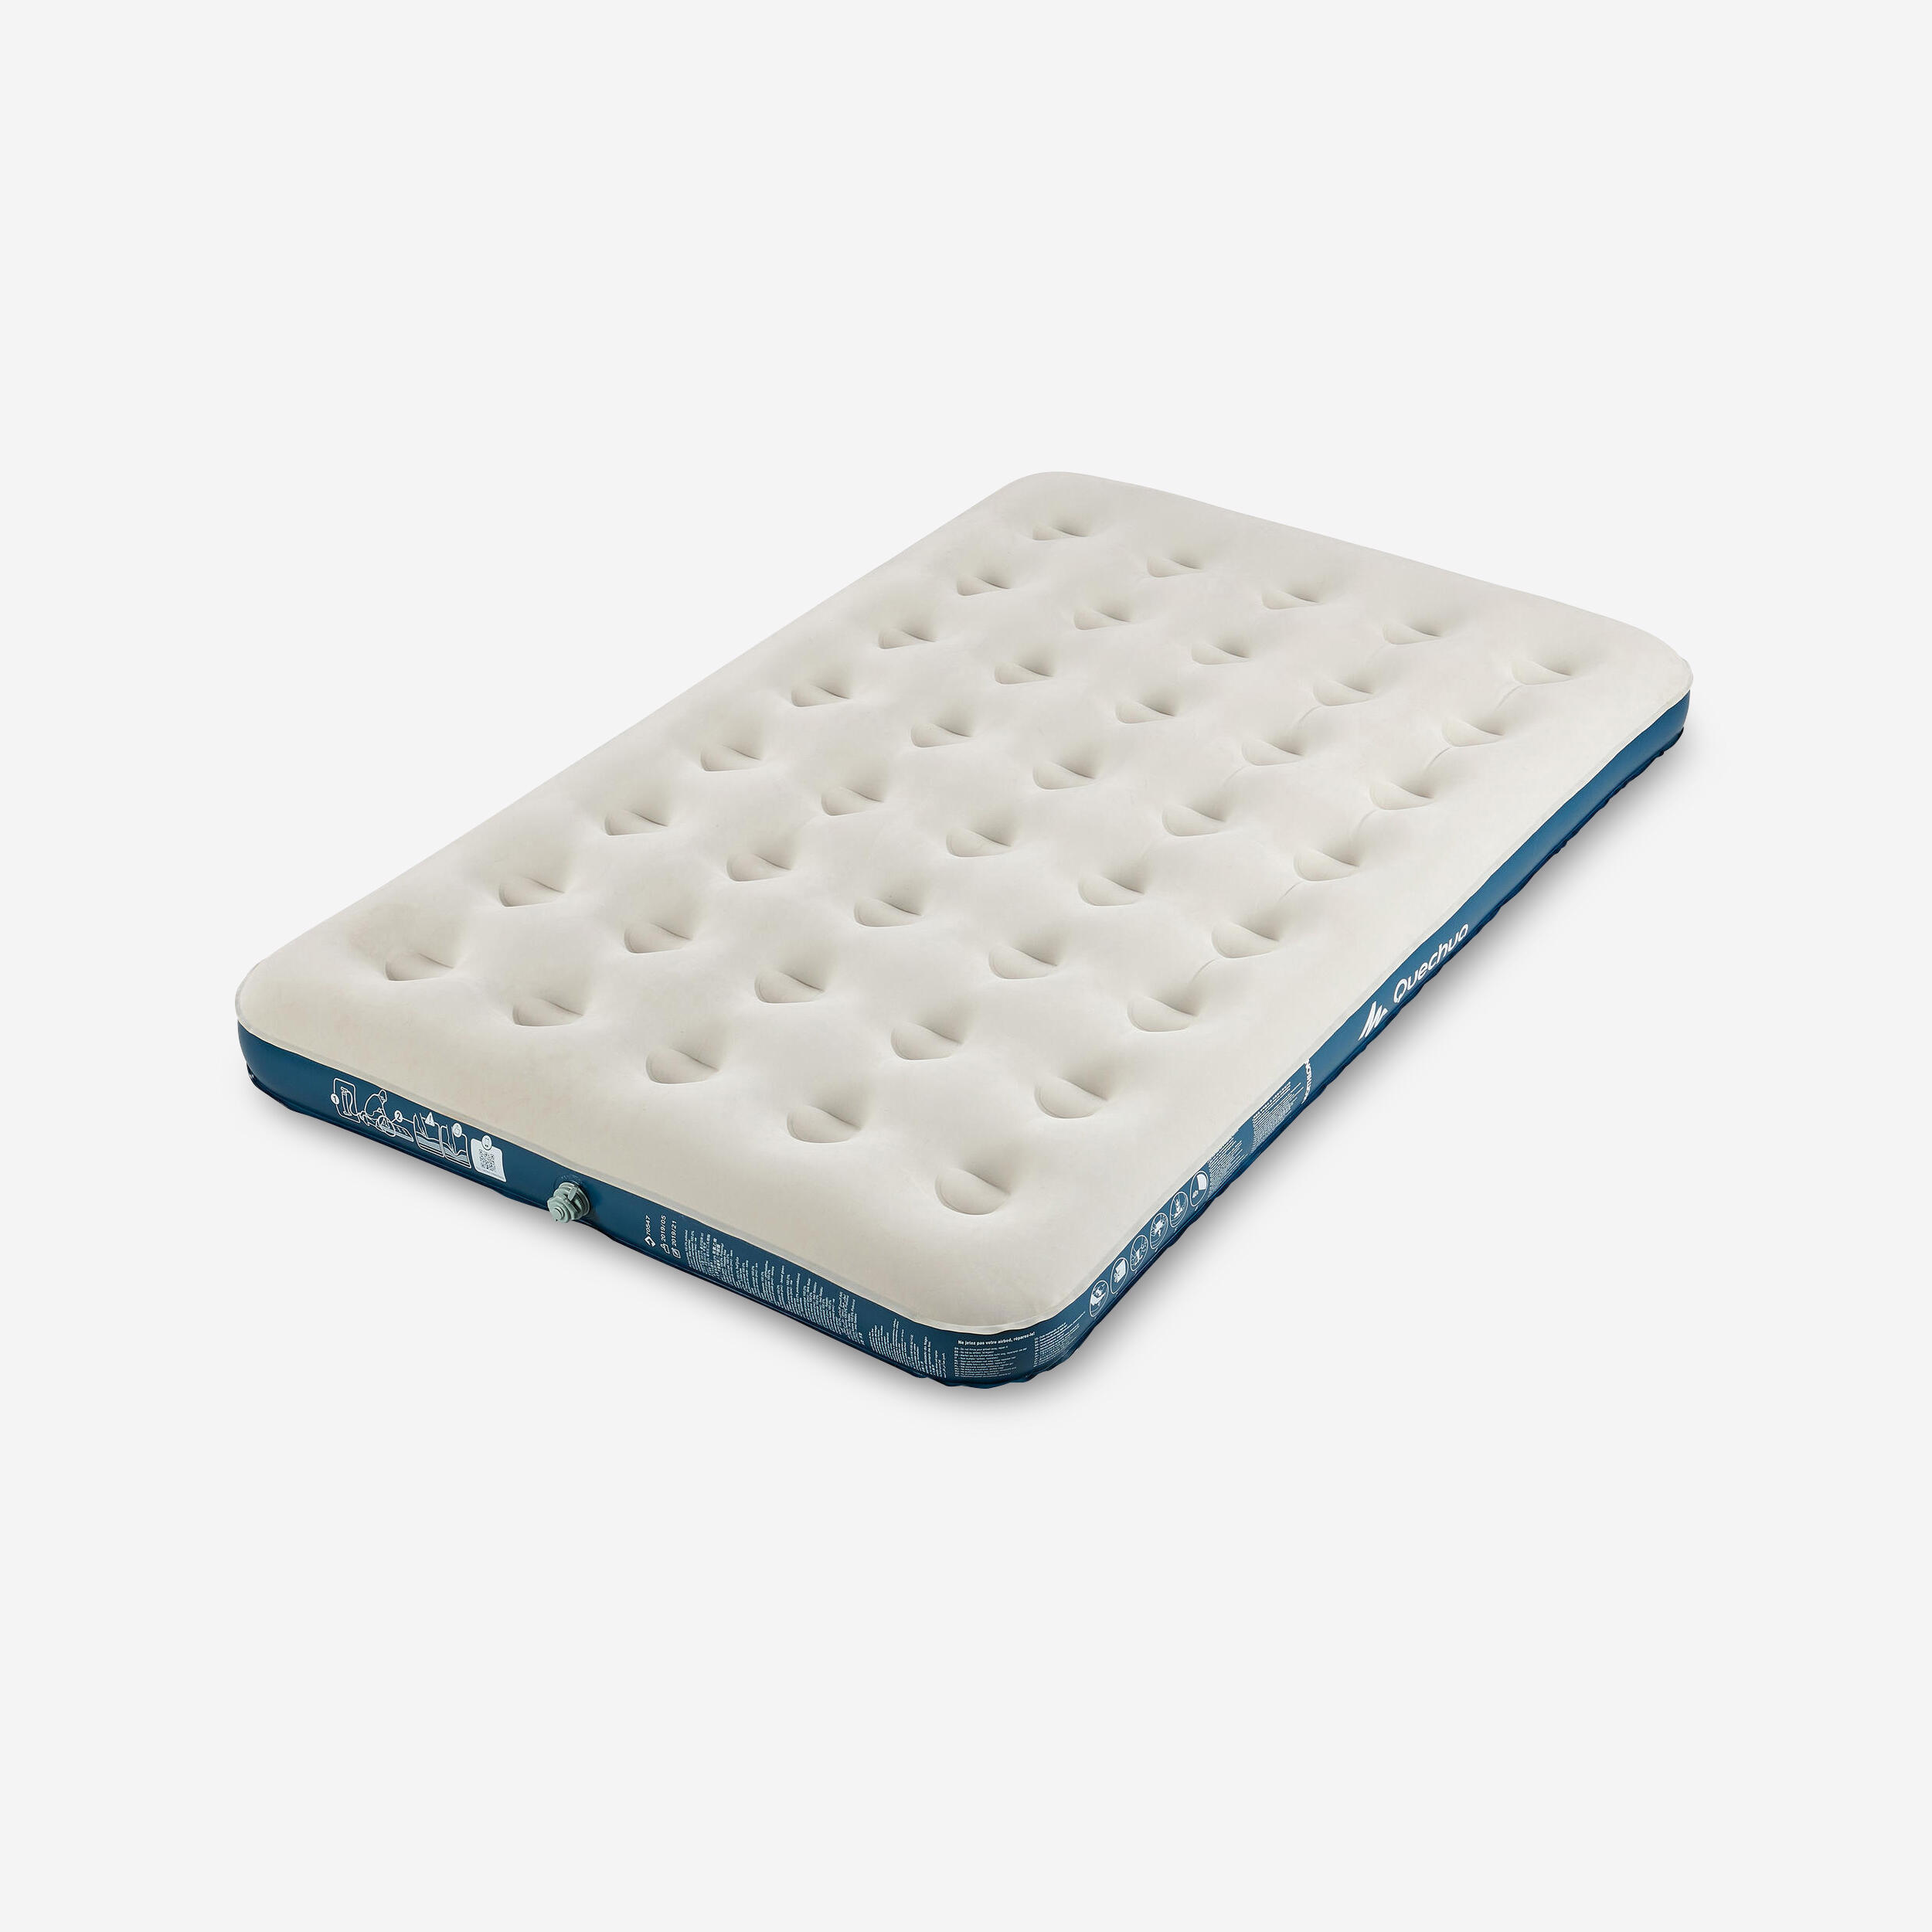 Air Basic Inflatable Camping Mattress -120 cm - 2-Person 1/8